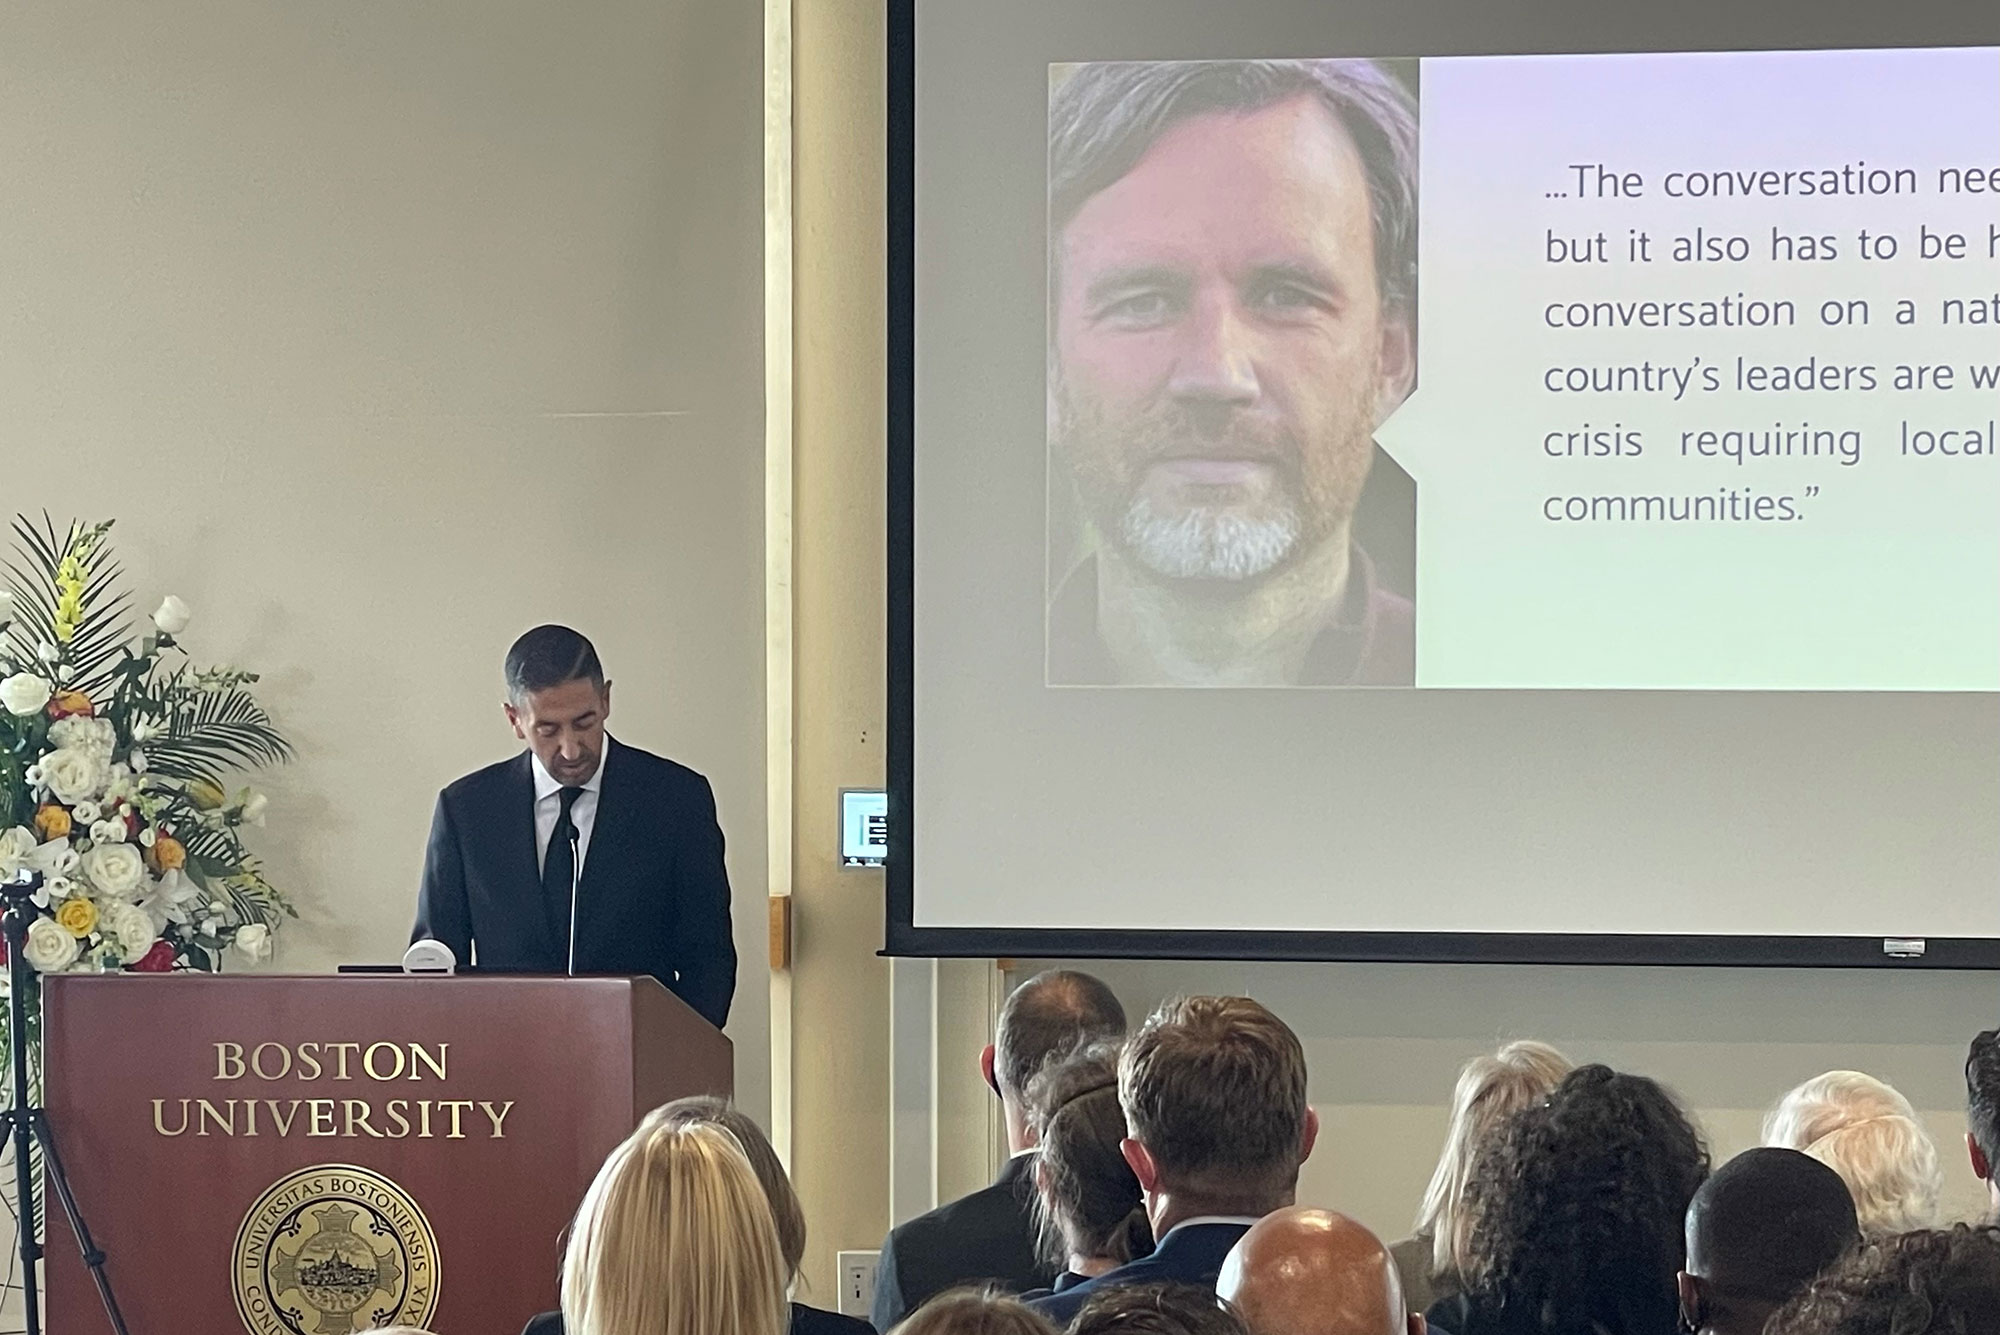 Photo of School of Public Health Dean Sandro Galea at a crimson Boston University podium, looking down and speaking into a mic, at a tearful memorial for David Jones. On a screen behind him, a photo of David Jones is seen—he’s a middle-aged man, smiling with salt-and-pepper hair and beard. A quote of his is next to his portrait but it’s cut off. The backs of peoples heads who are seating are seen in the foreground.